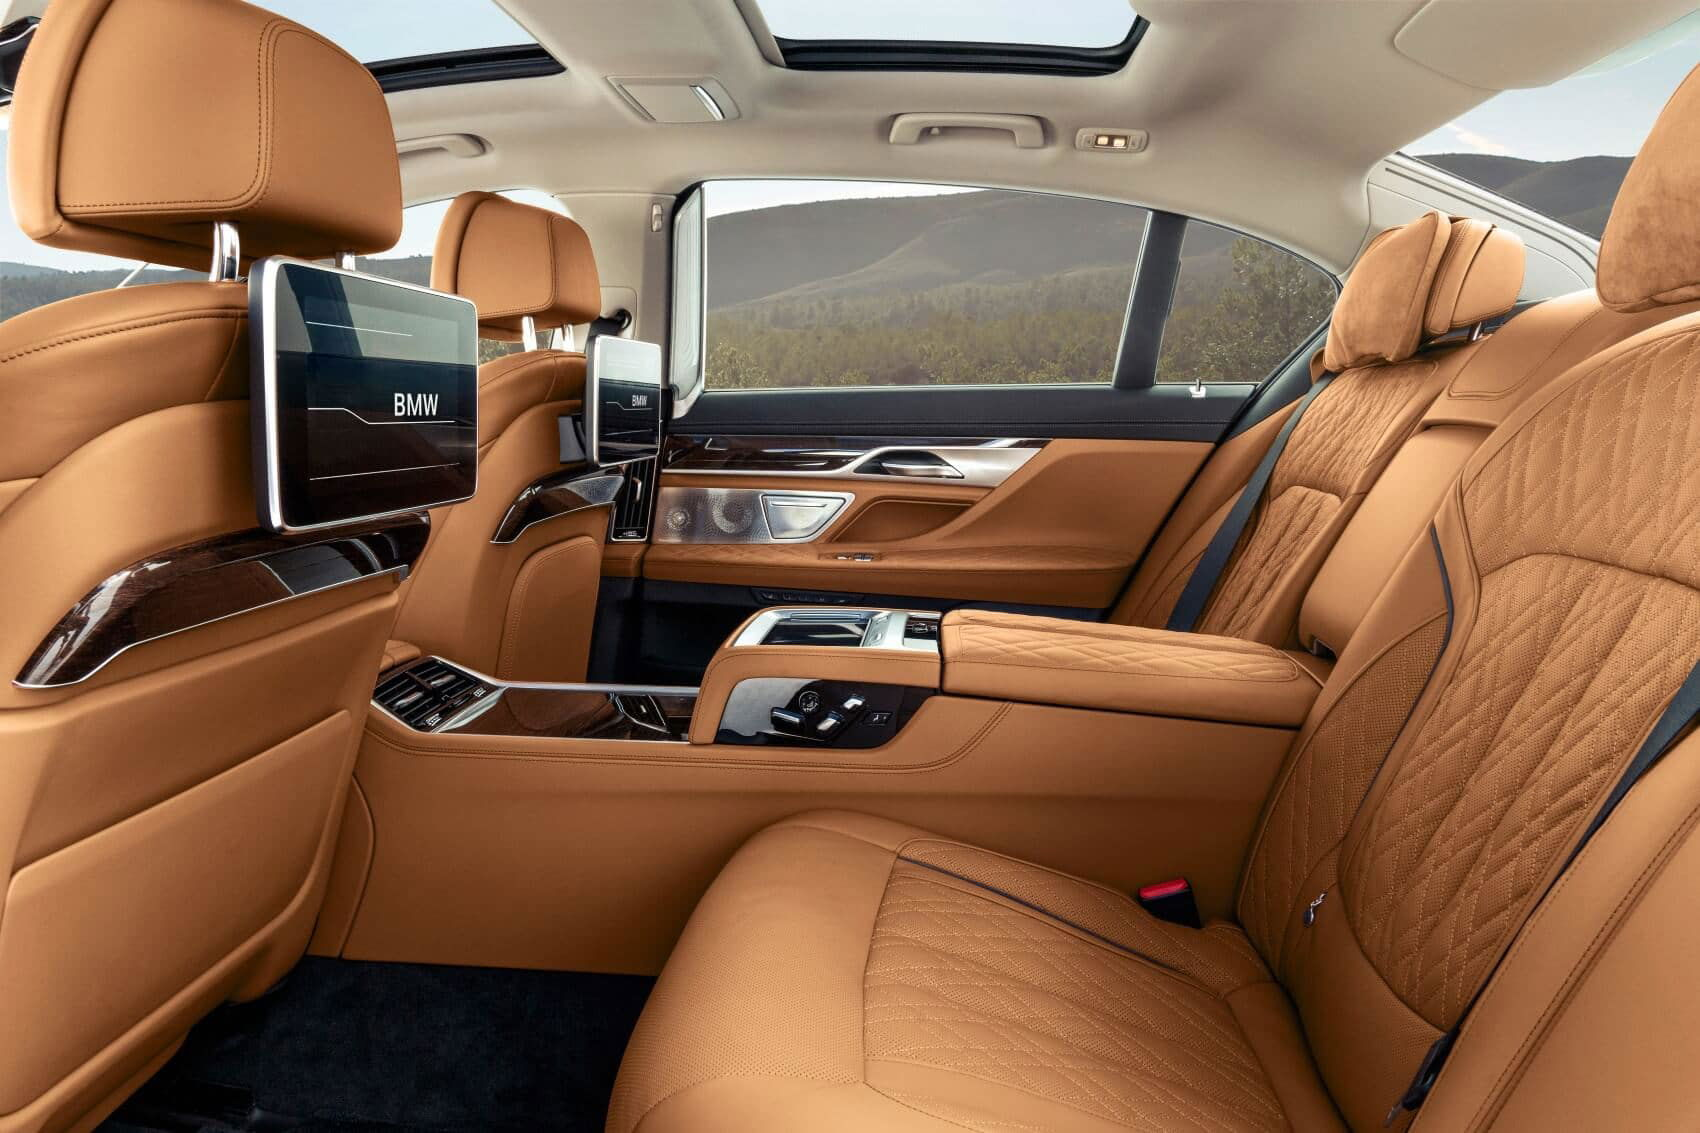 The cars with the best interior design.